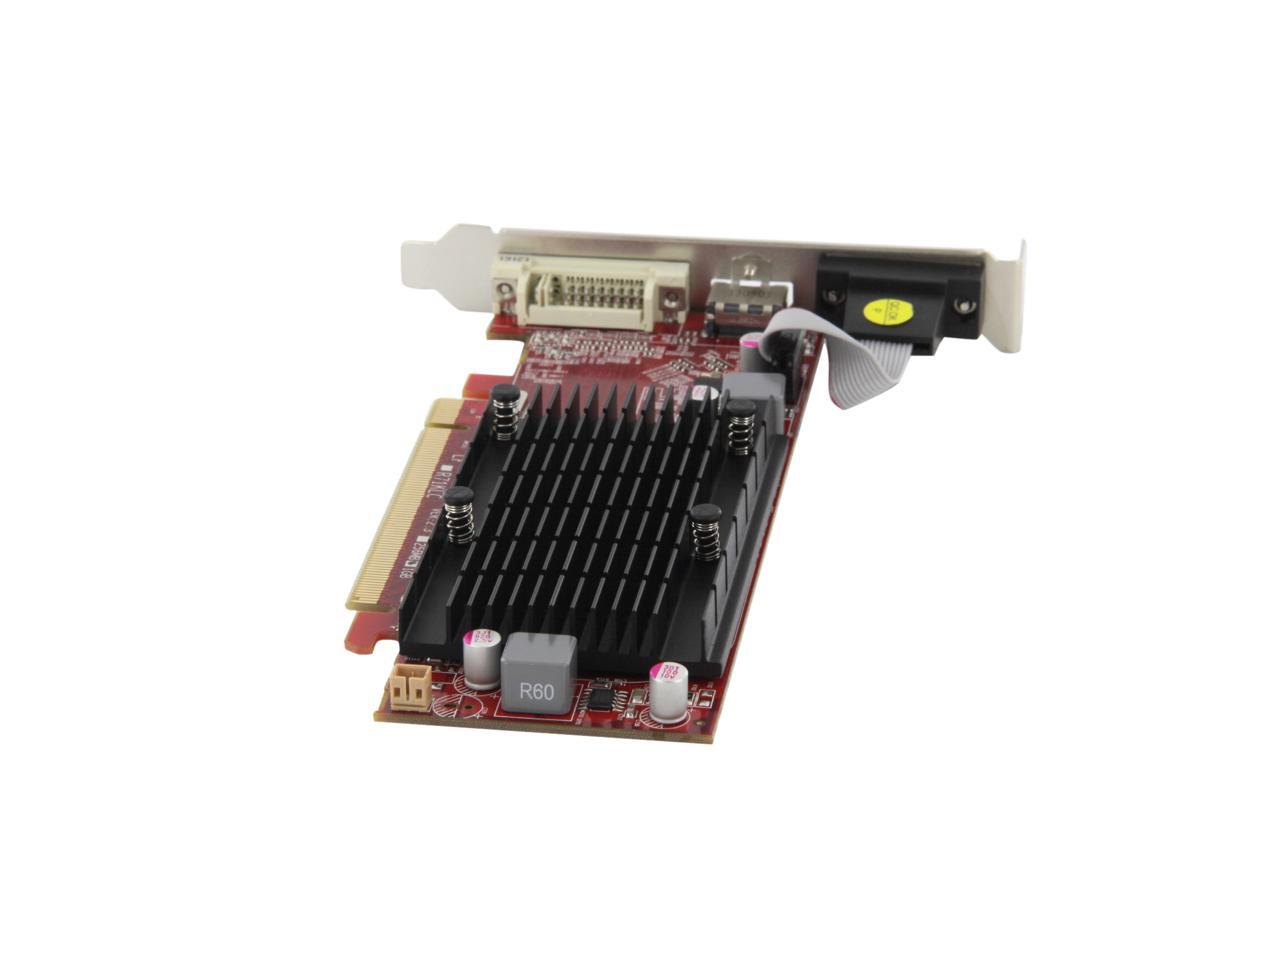 is the ati radeon hd 4250 a 3d graphics card